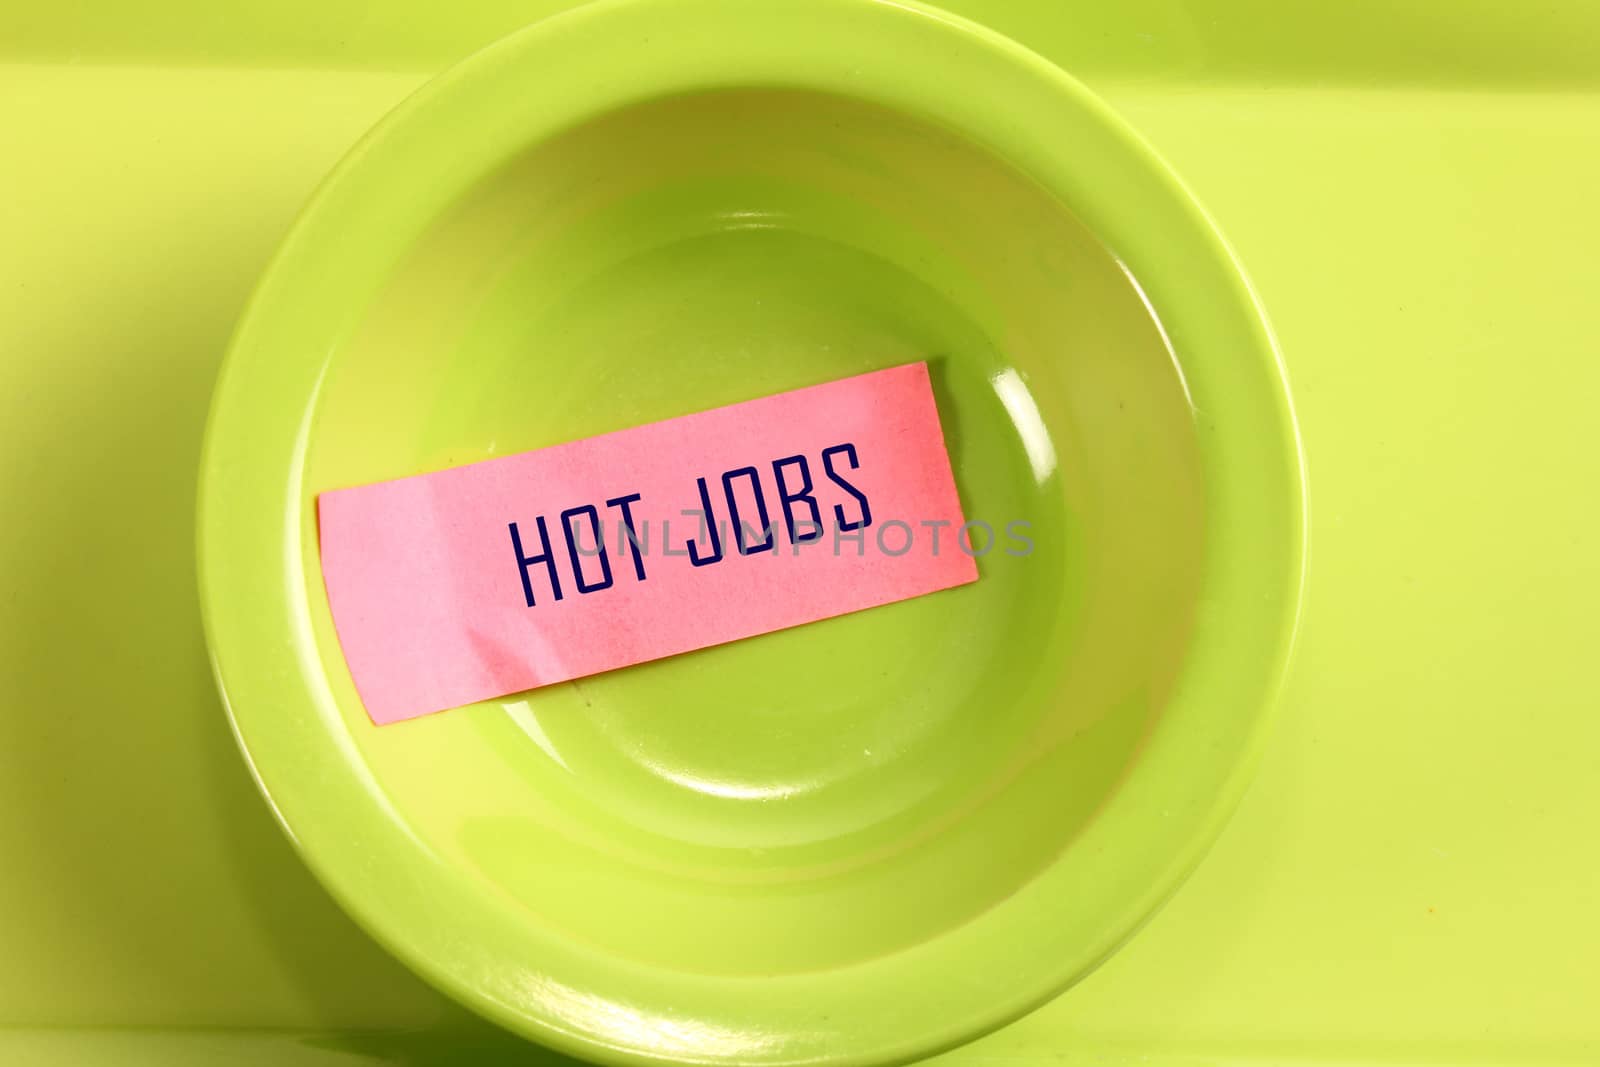 hot jobs tag in bowl by frameshade